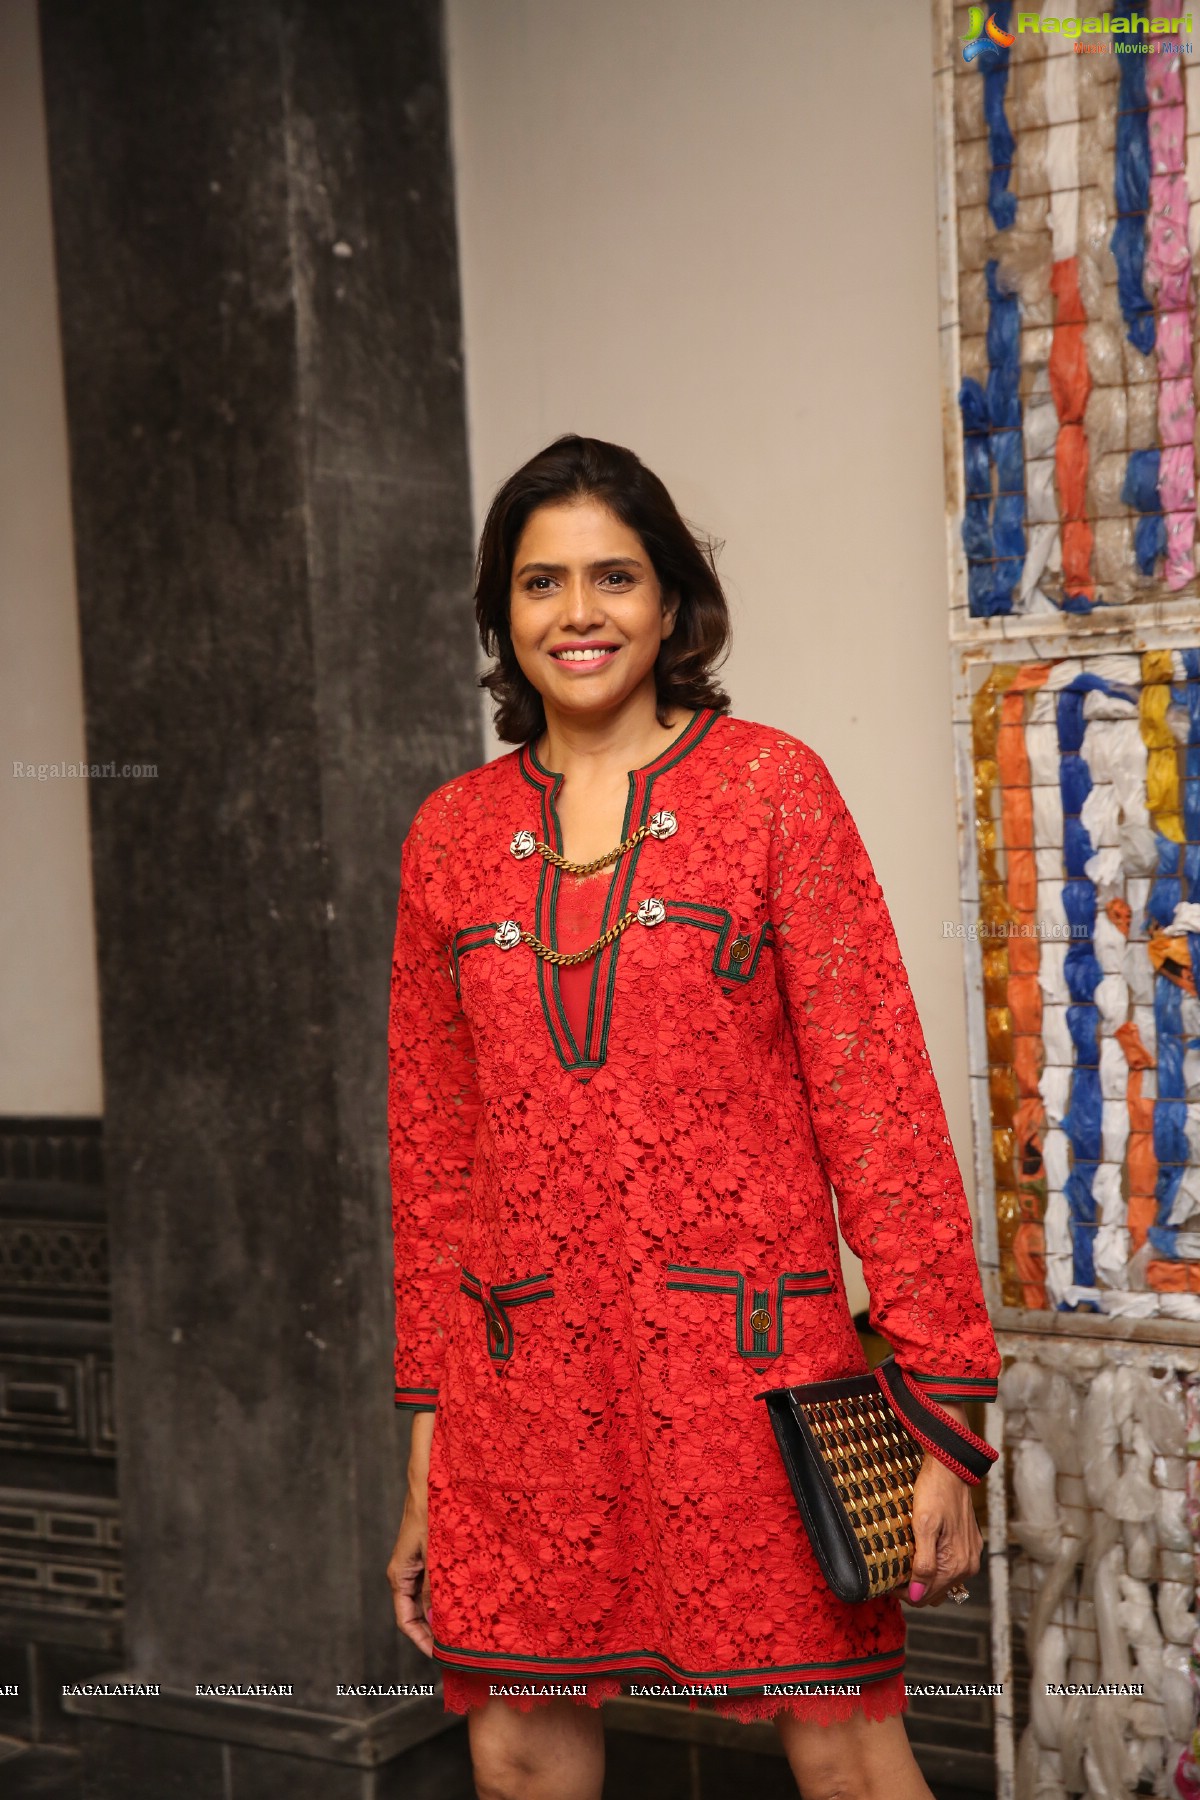 Wildest Dreams - A Fundraiser Gala, Exhibition of Paintings at Shrishti Art Gallery